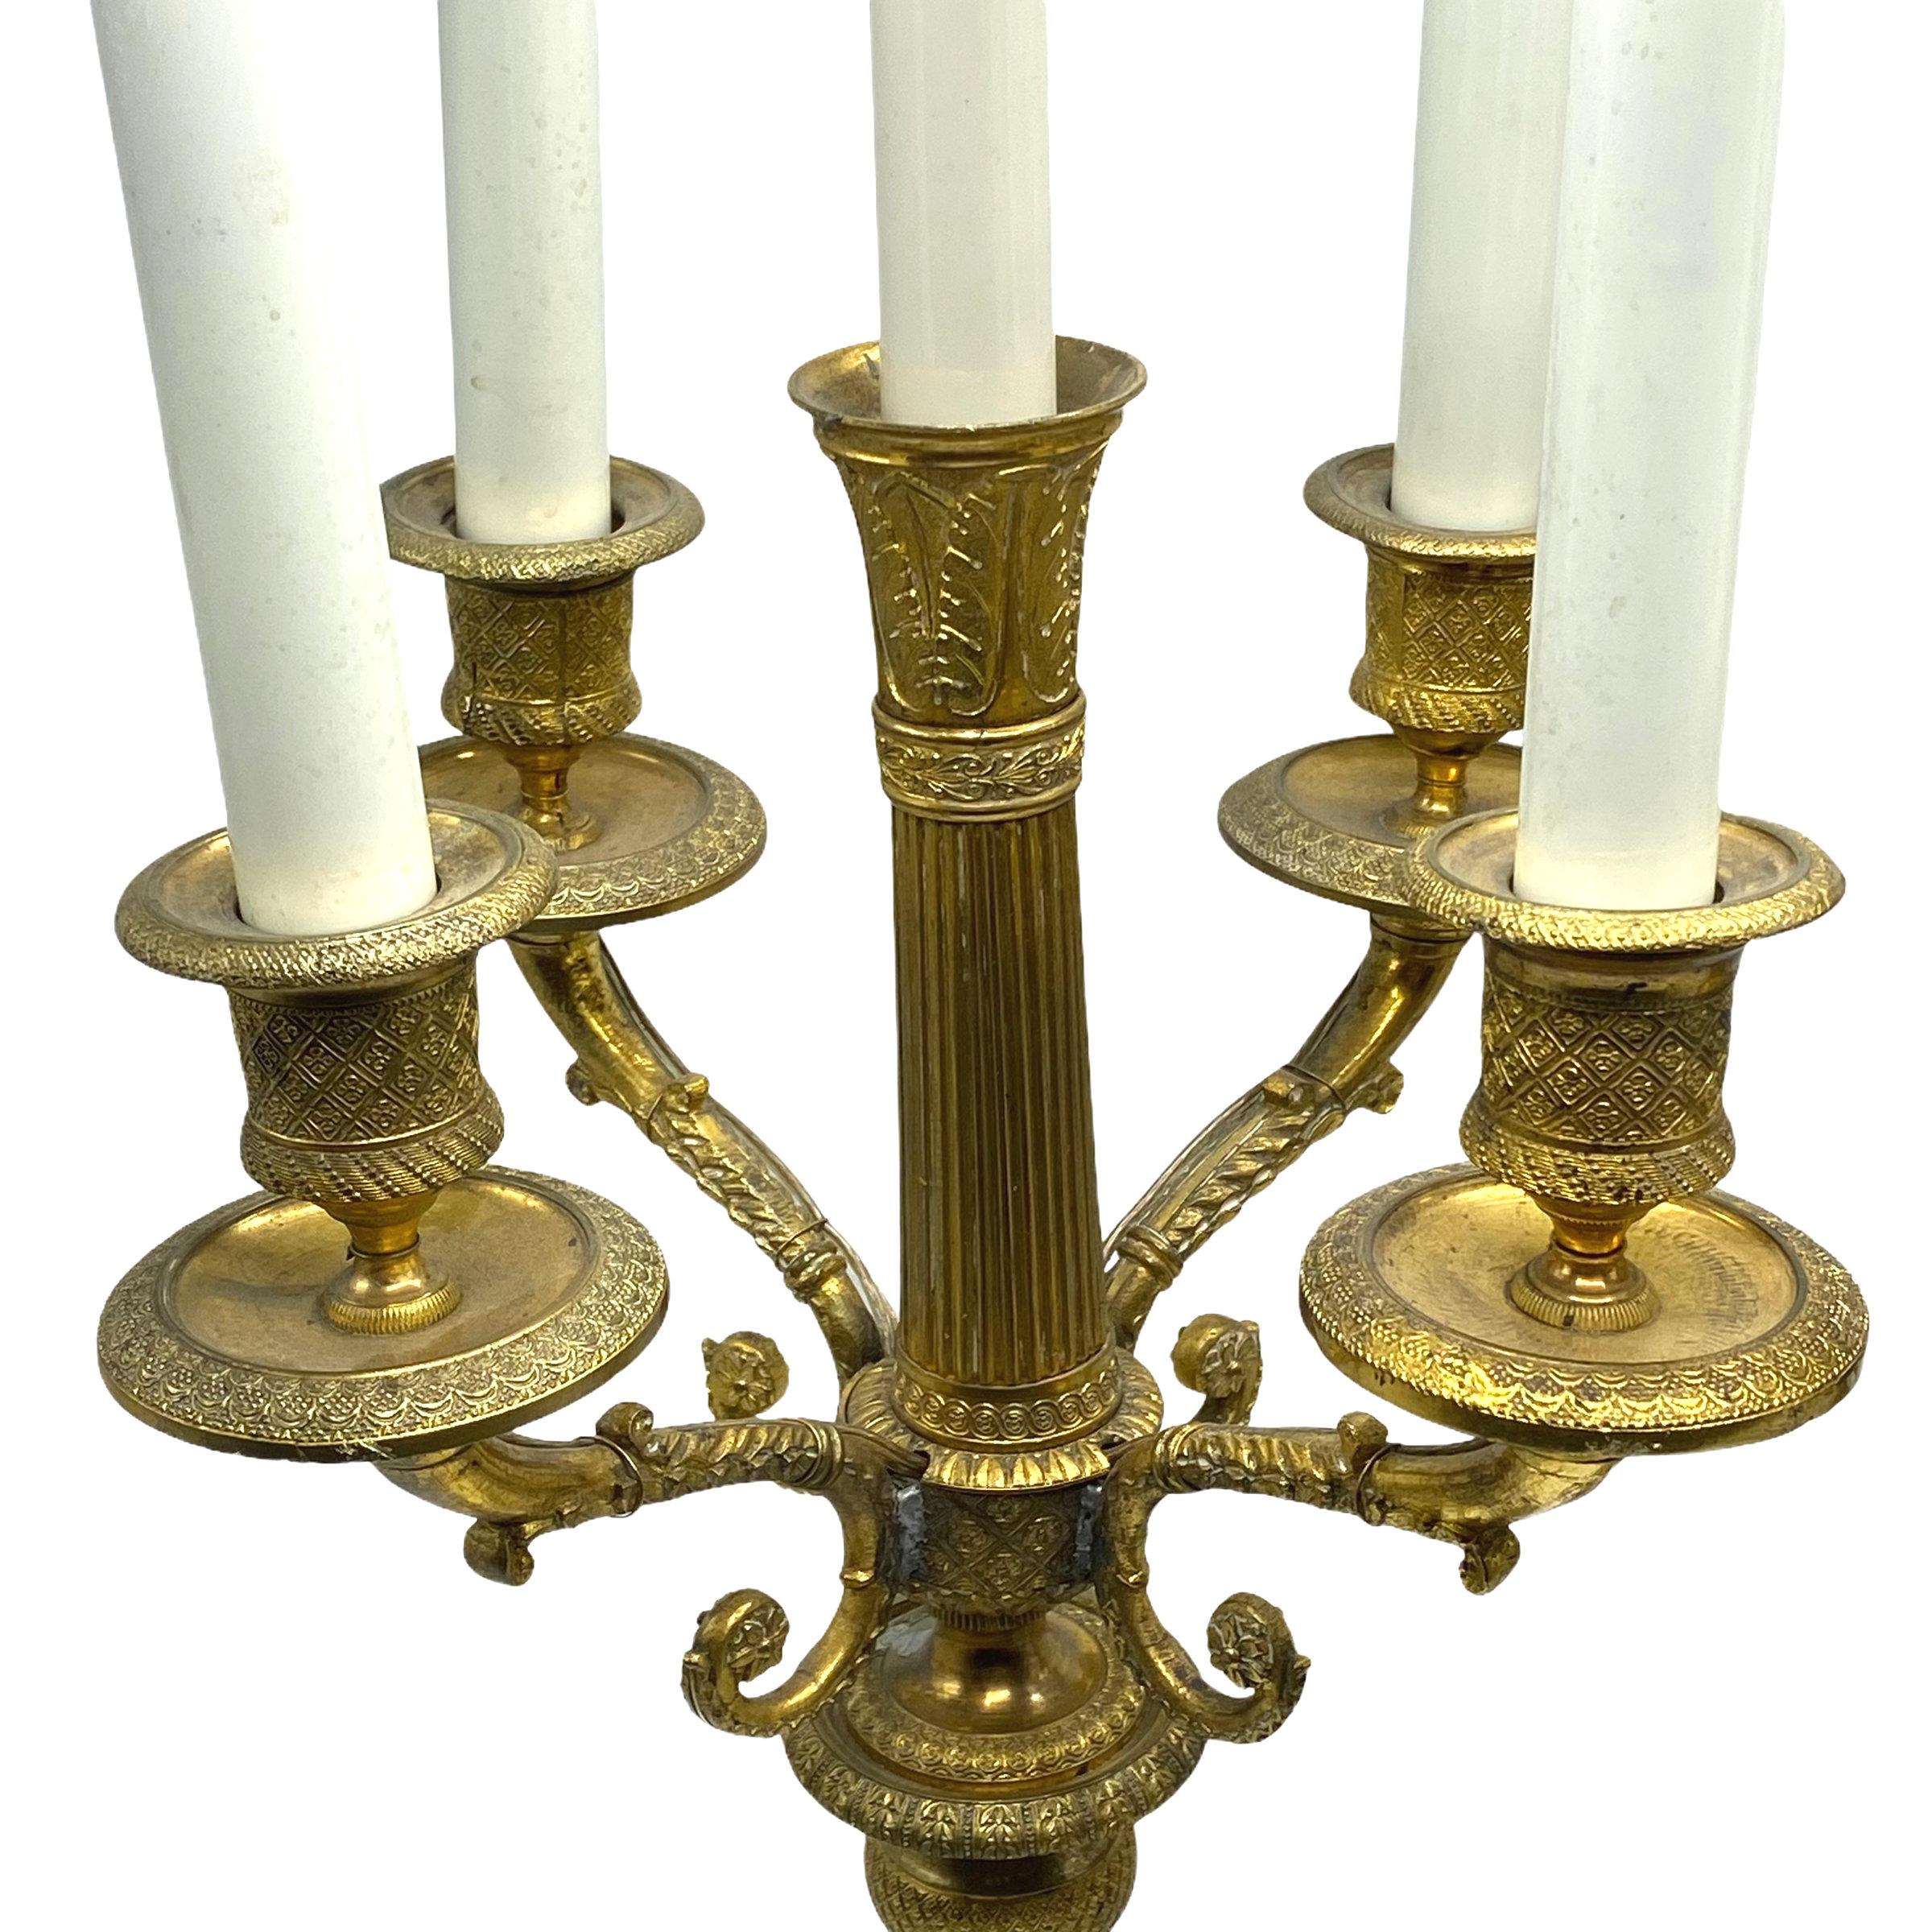 pair of 19th Century French Empire Gilt Bronze Candelabra Lamps in  Charles X style, later electrified in the late 19th to early 20th century, with candelabra size sockets and circular on/off switches installed at the bases.
